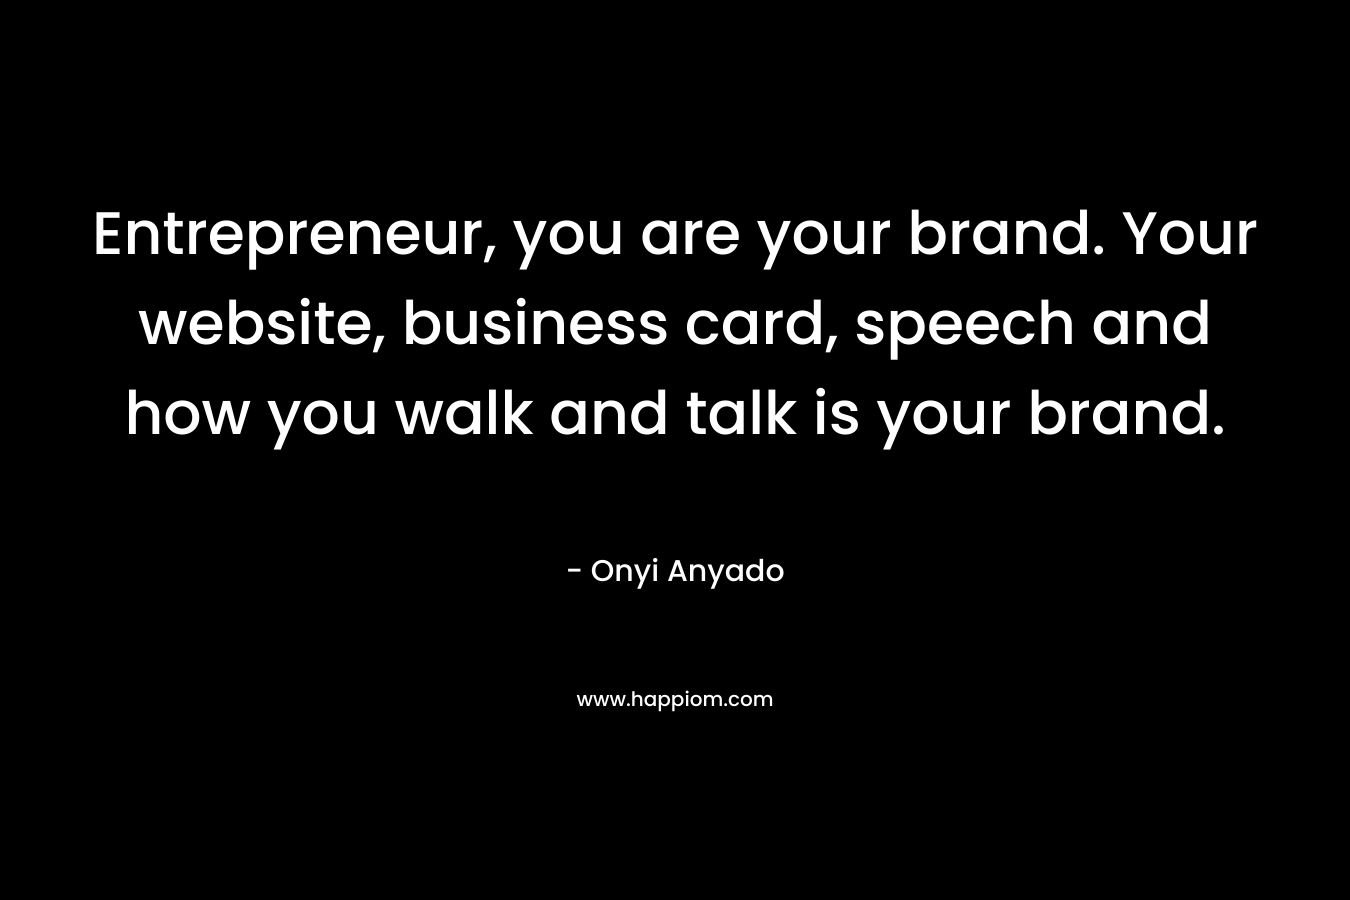 Entrepreneur, you are your brand. Your website, business card, speech and how you walk and talk is your brand.